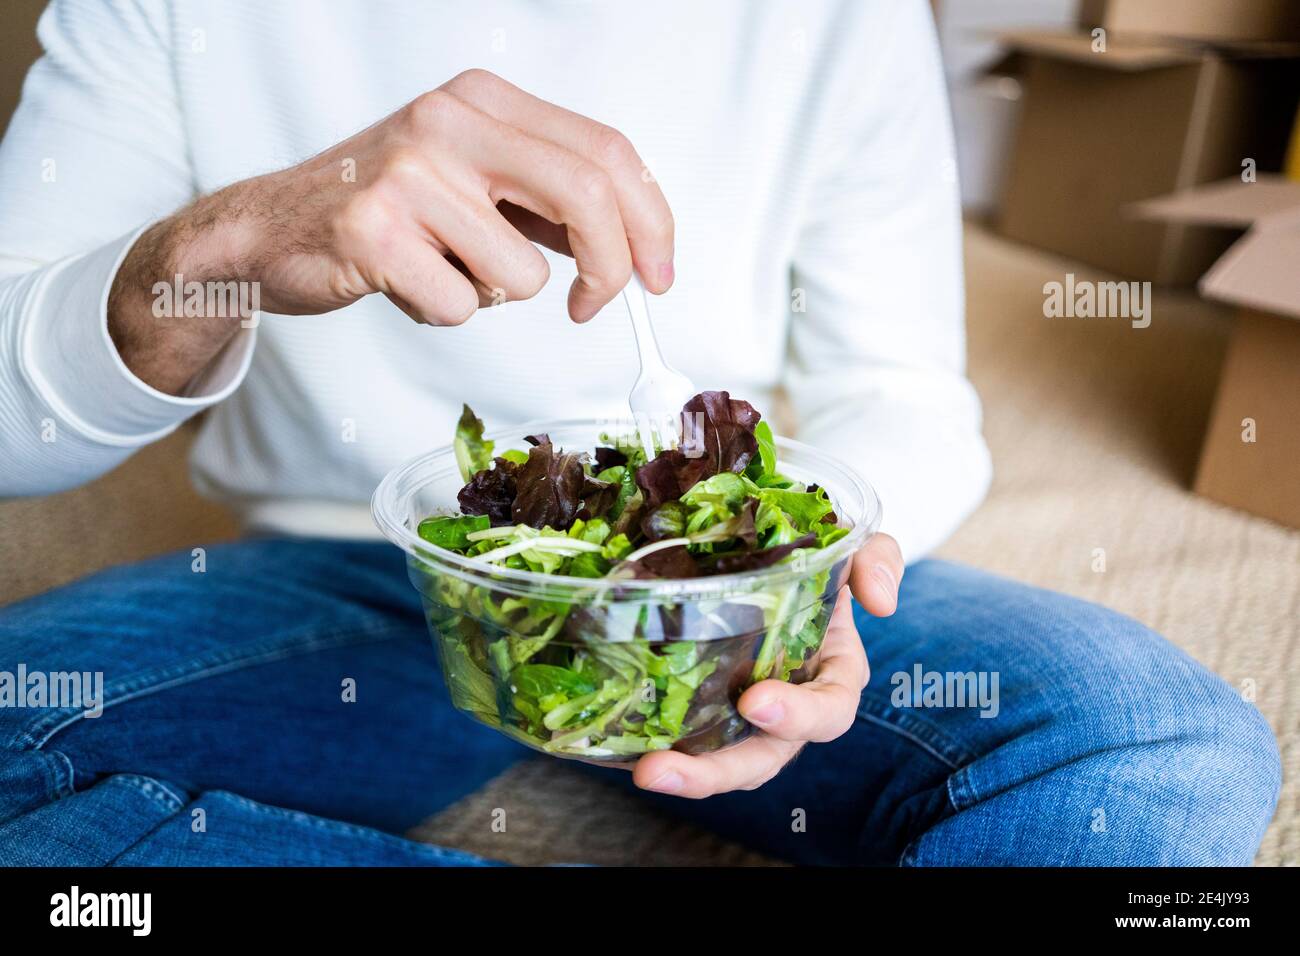 Young woman holding leafy vegetable salad in new home Stock Photo